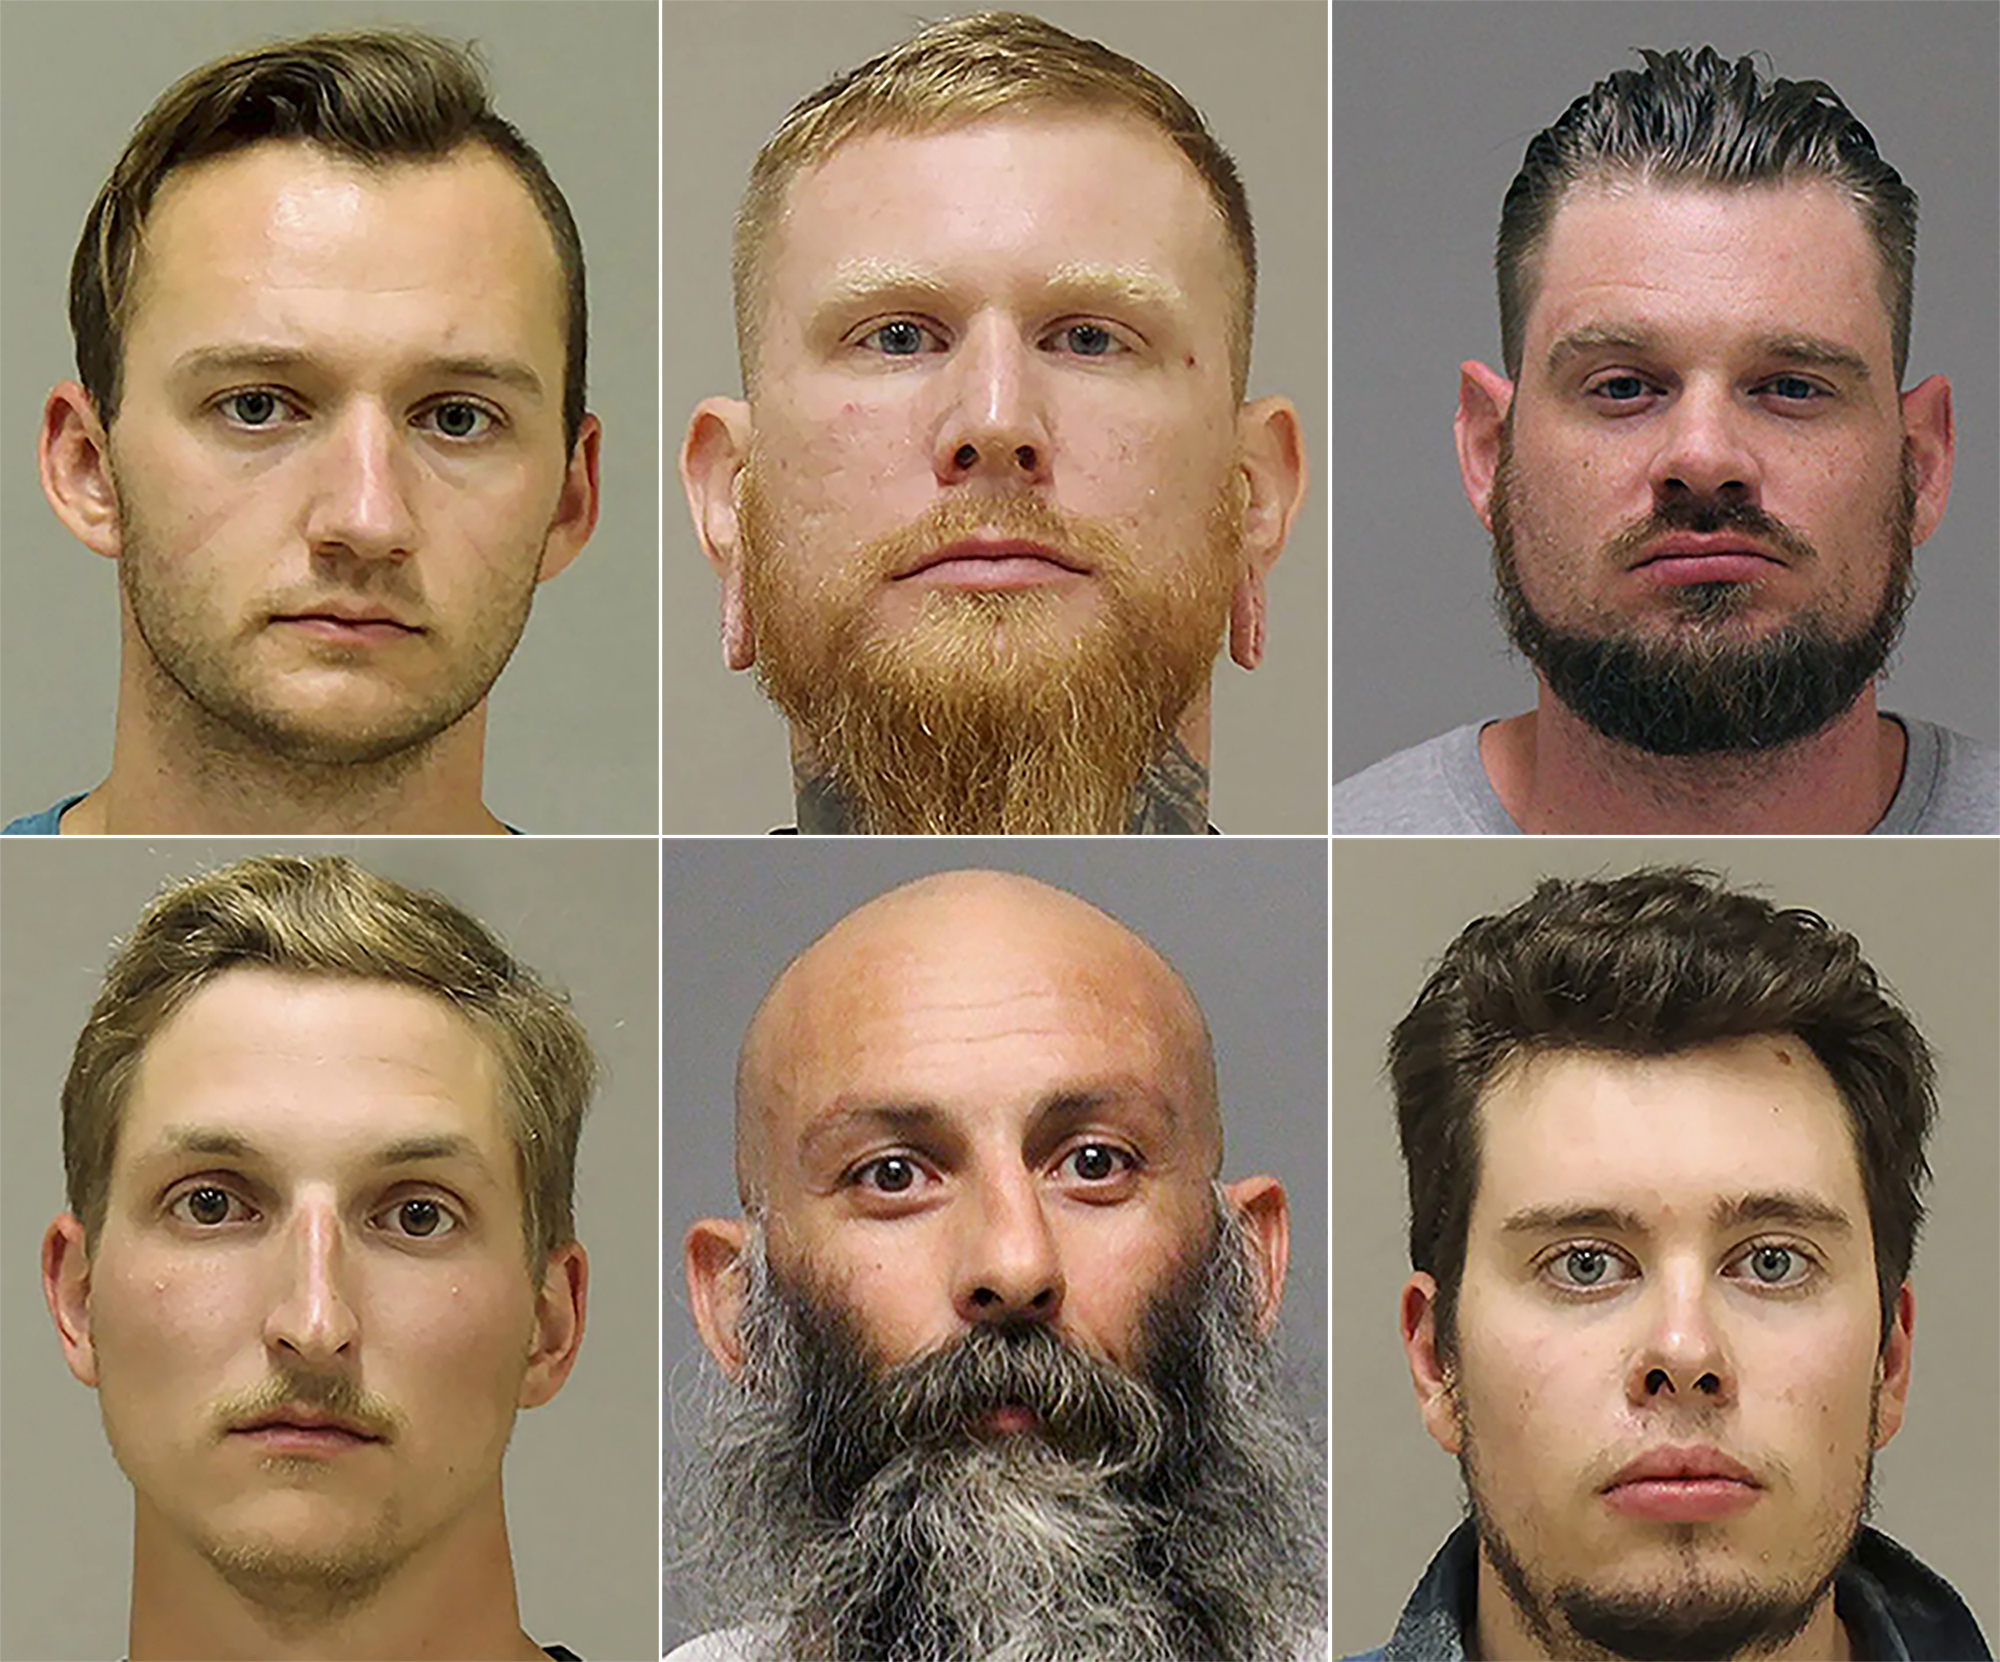 A federal grand jury has charged six men with conspiring to kidnap Michigan Gov. Gretchen Whitmer: Top row (L) Kaleb Franks, (C) Brandon Caserta, (R) Adam Dean Fox, and bottom row (L) Daniel Harris, (C) Barry Croft, and (R) Ty Garbin, in an indictment released Dec. 17, 2020. (Kent County Sheriff via AP File)